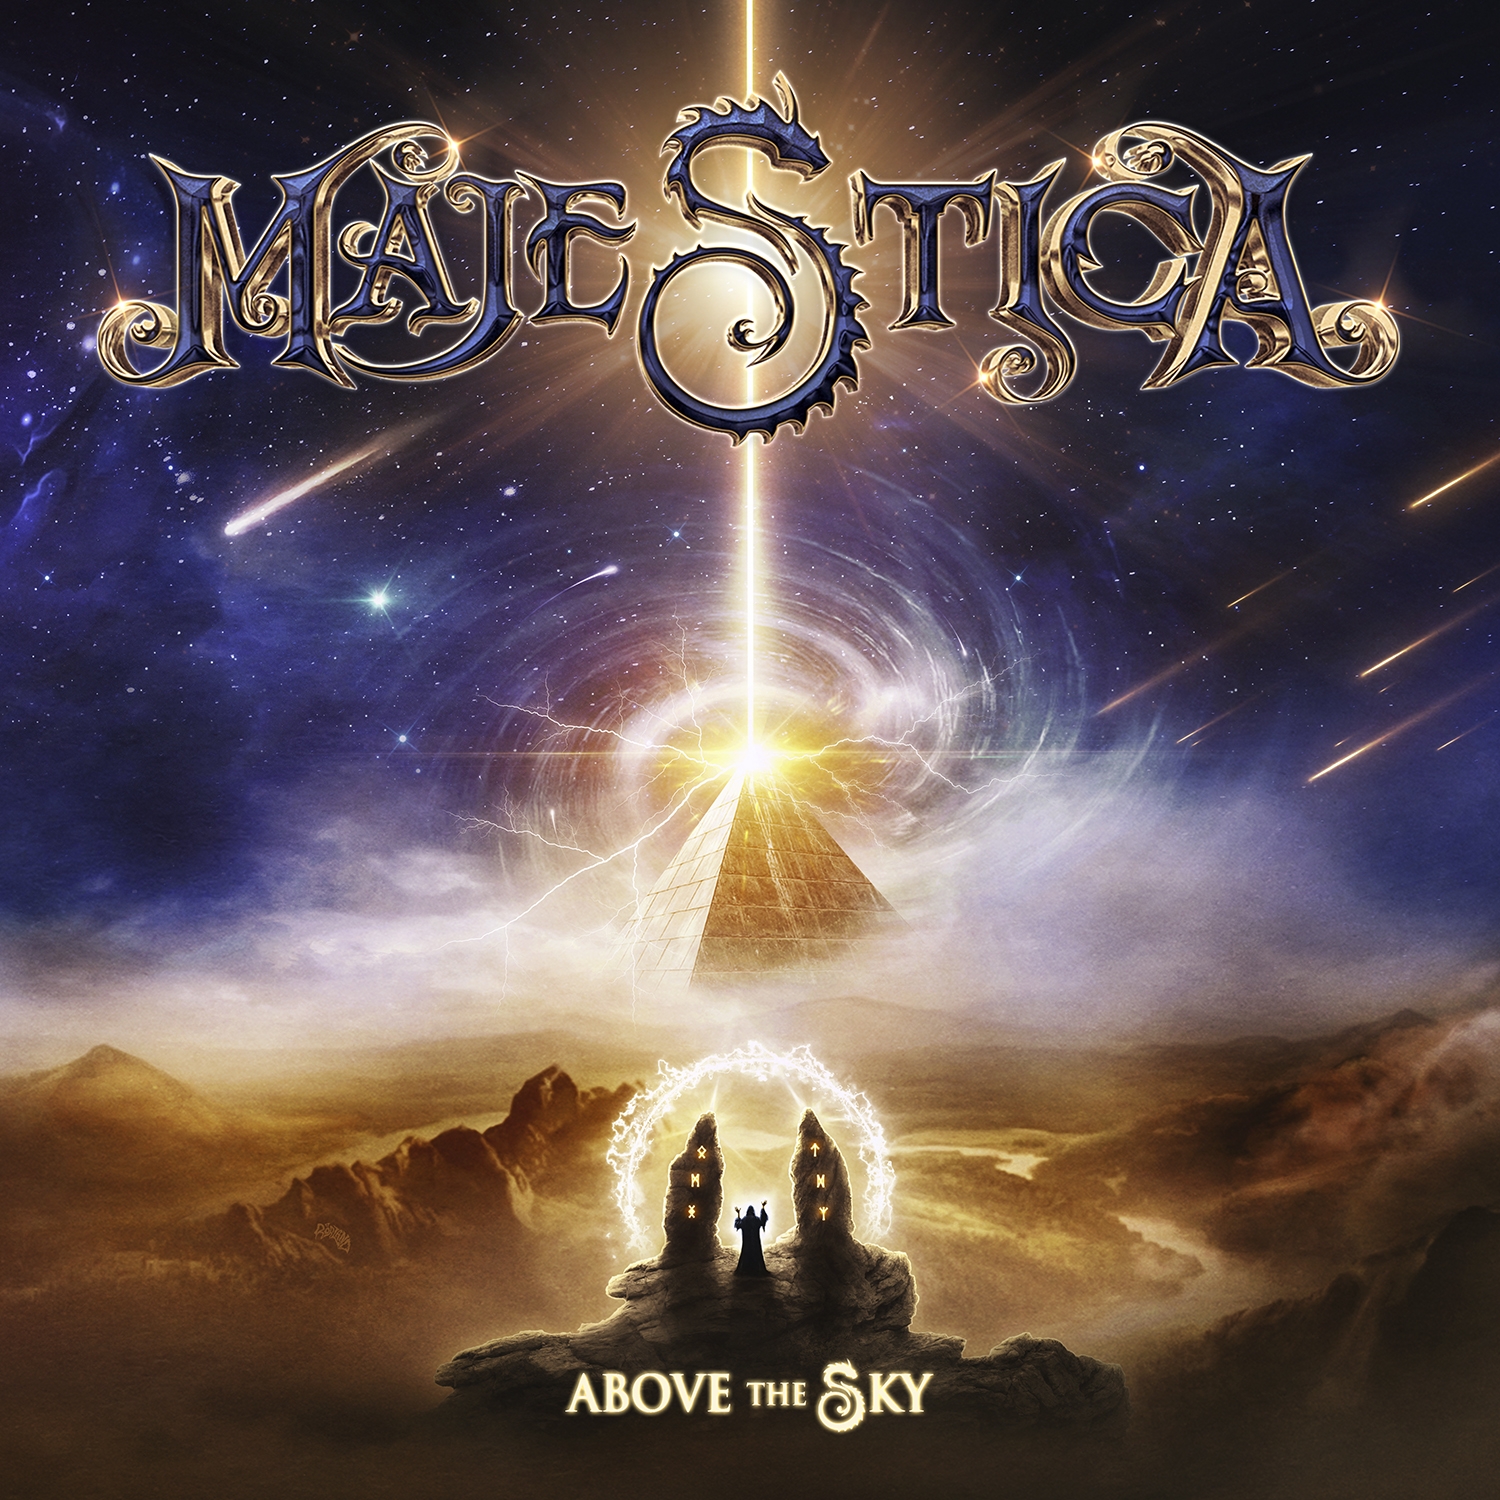 Metal-Review: MAJESTICA – ABOVE THE SKY